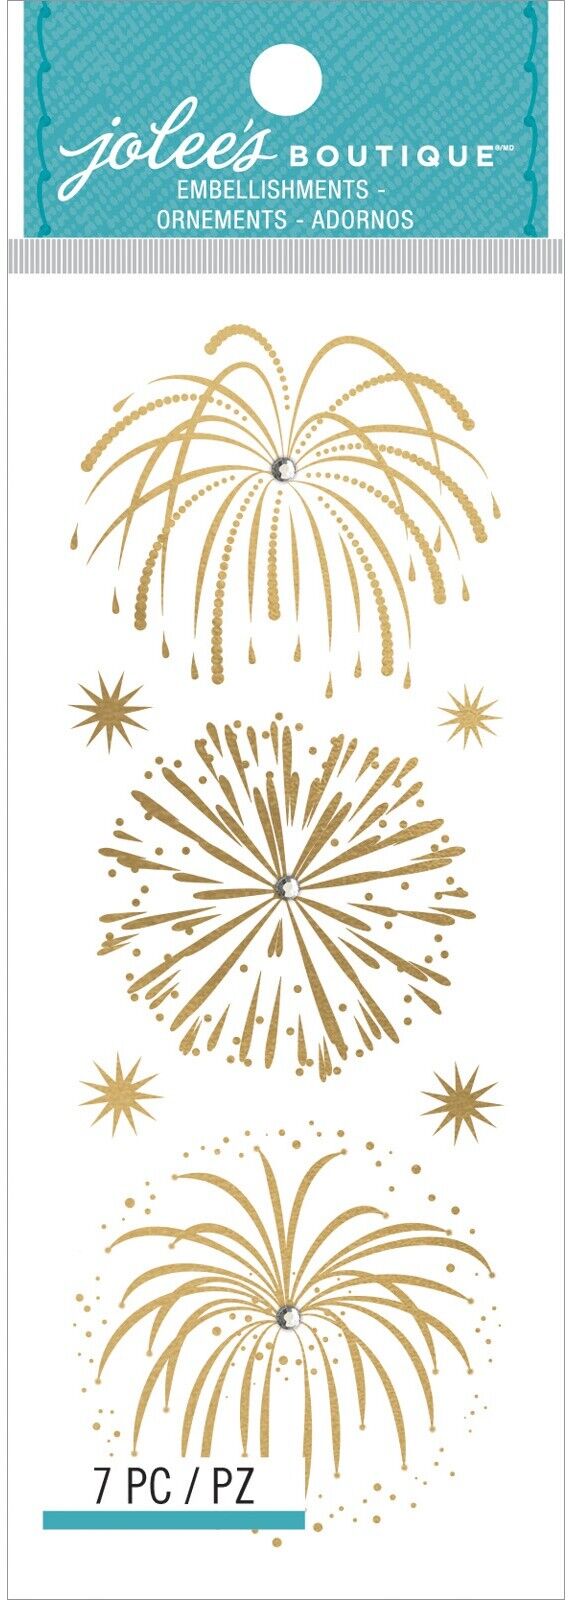 Jolee's Boutique Bling Stickers - Fireworks